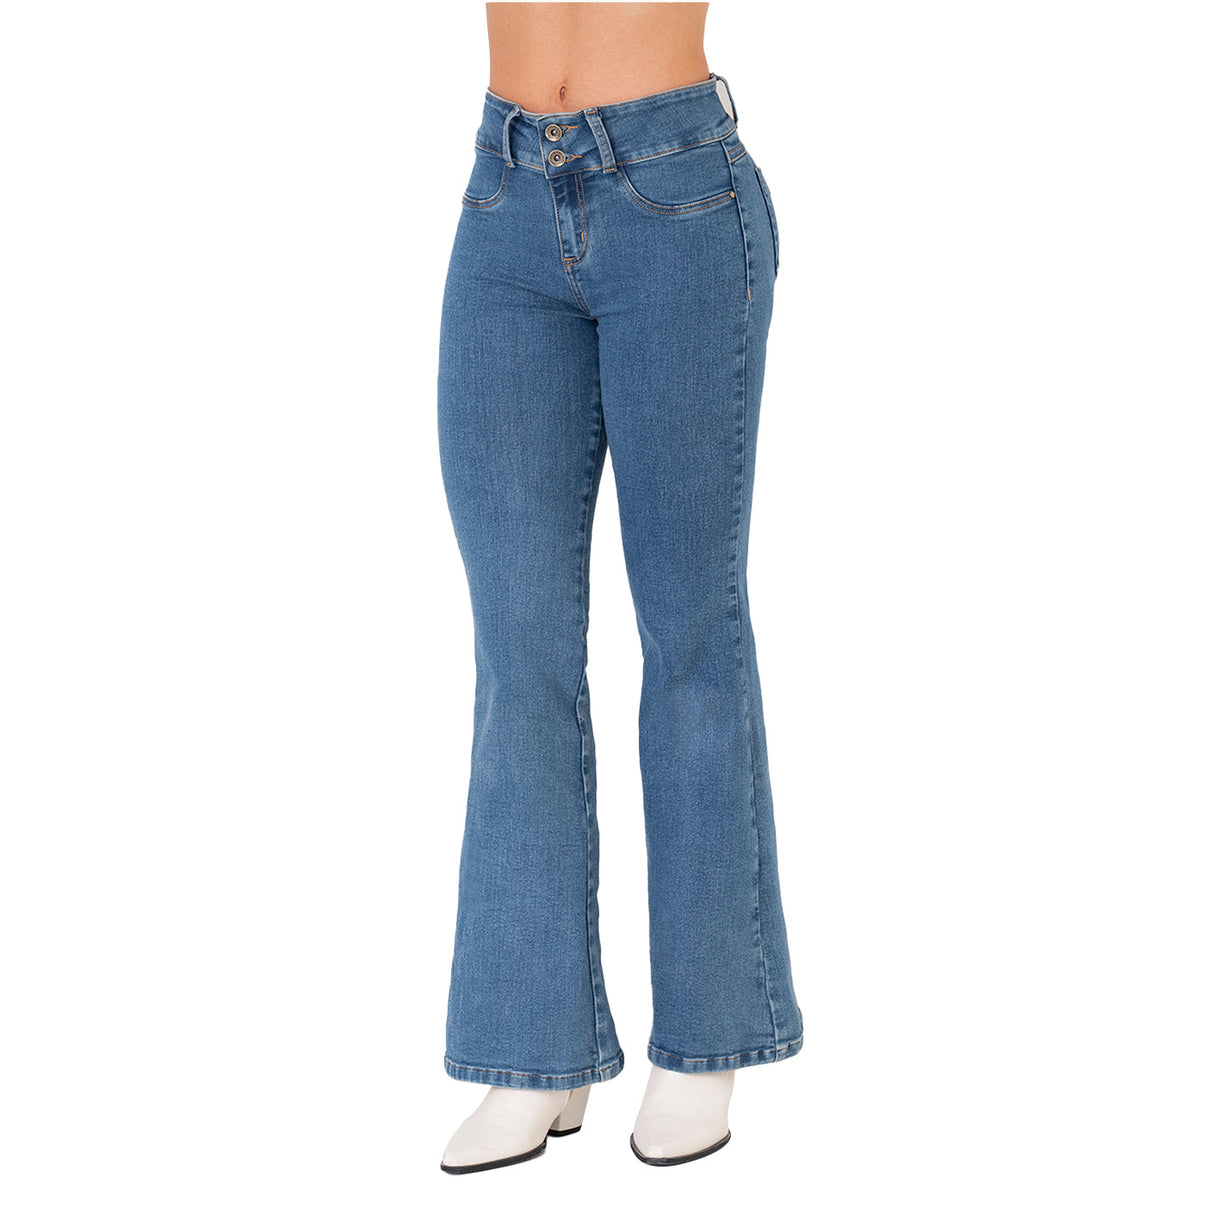 Colombian Butt Lifter Jeans with removable pads – Fajas